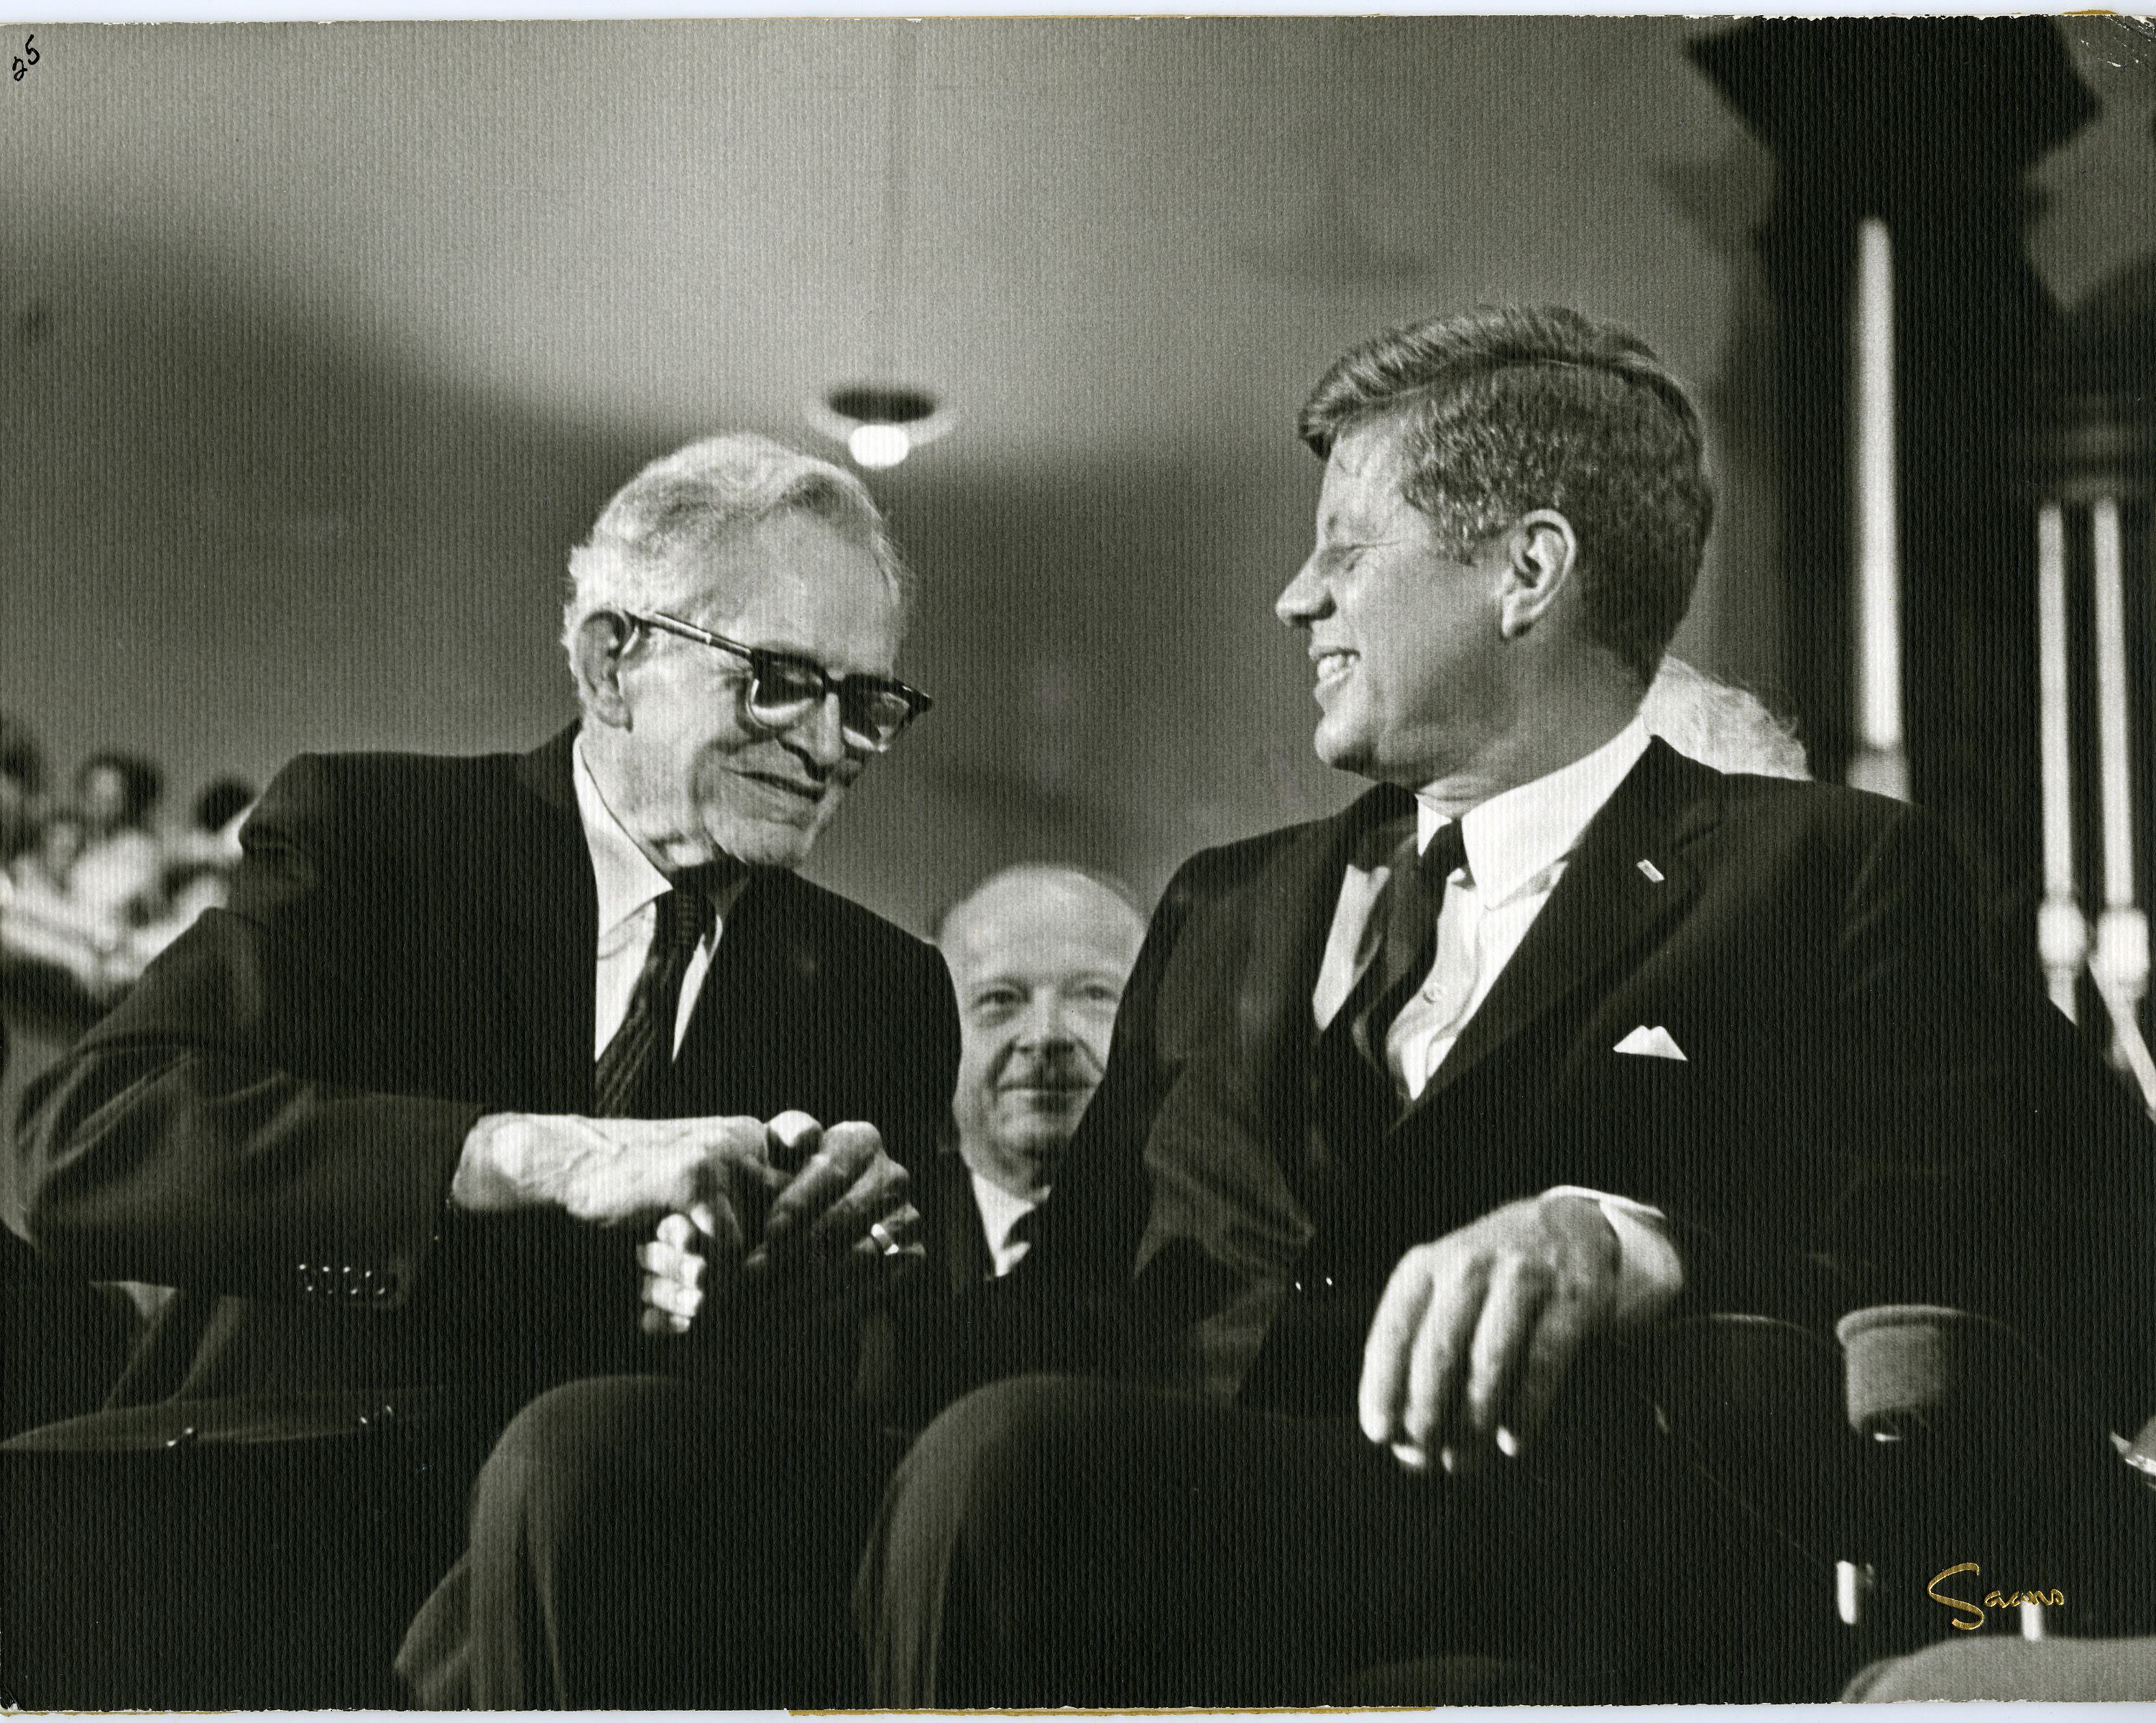 (The Church of Jesus Christ of Latter-day Saints) President David O. McKay, left, with U.S. President John F. Kennedy in the Tabernacle in September 1963.